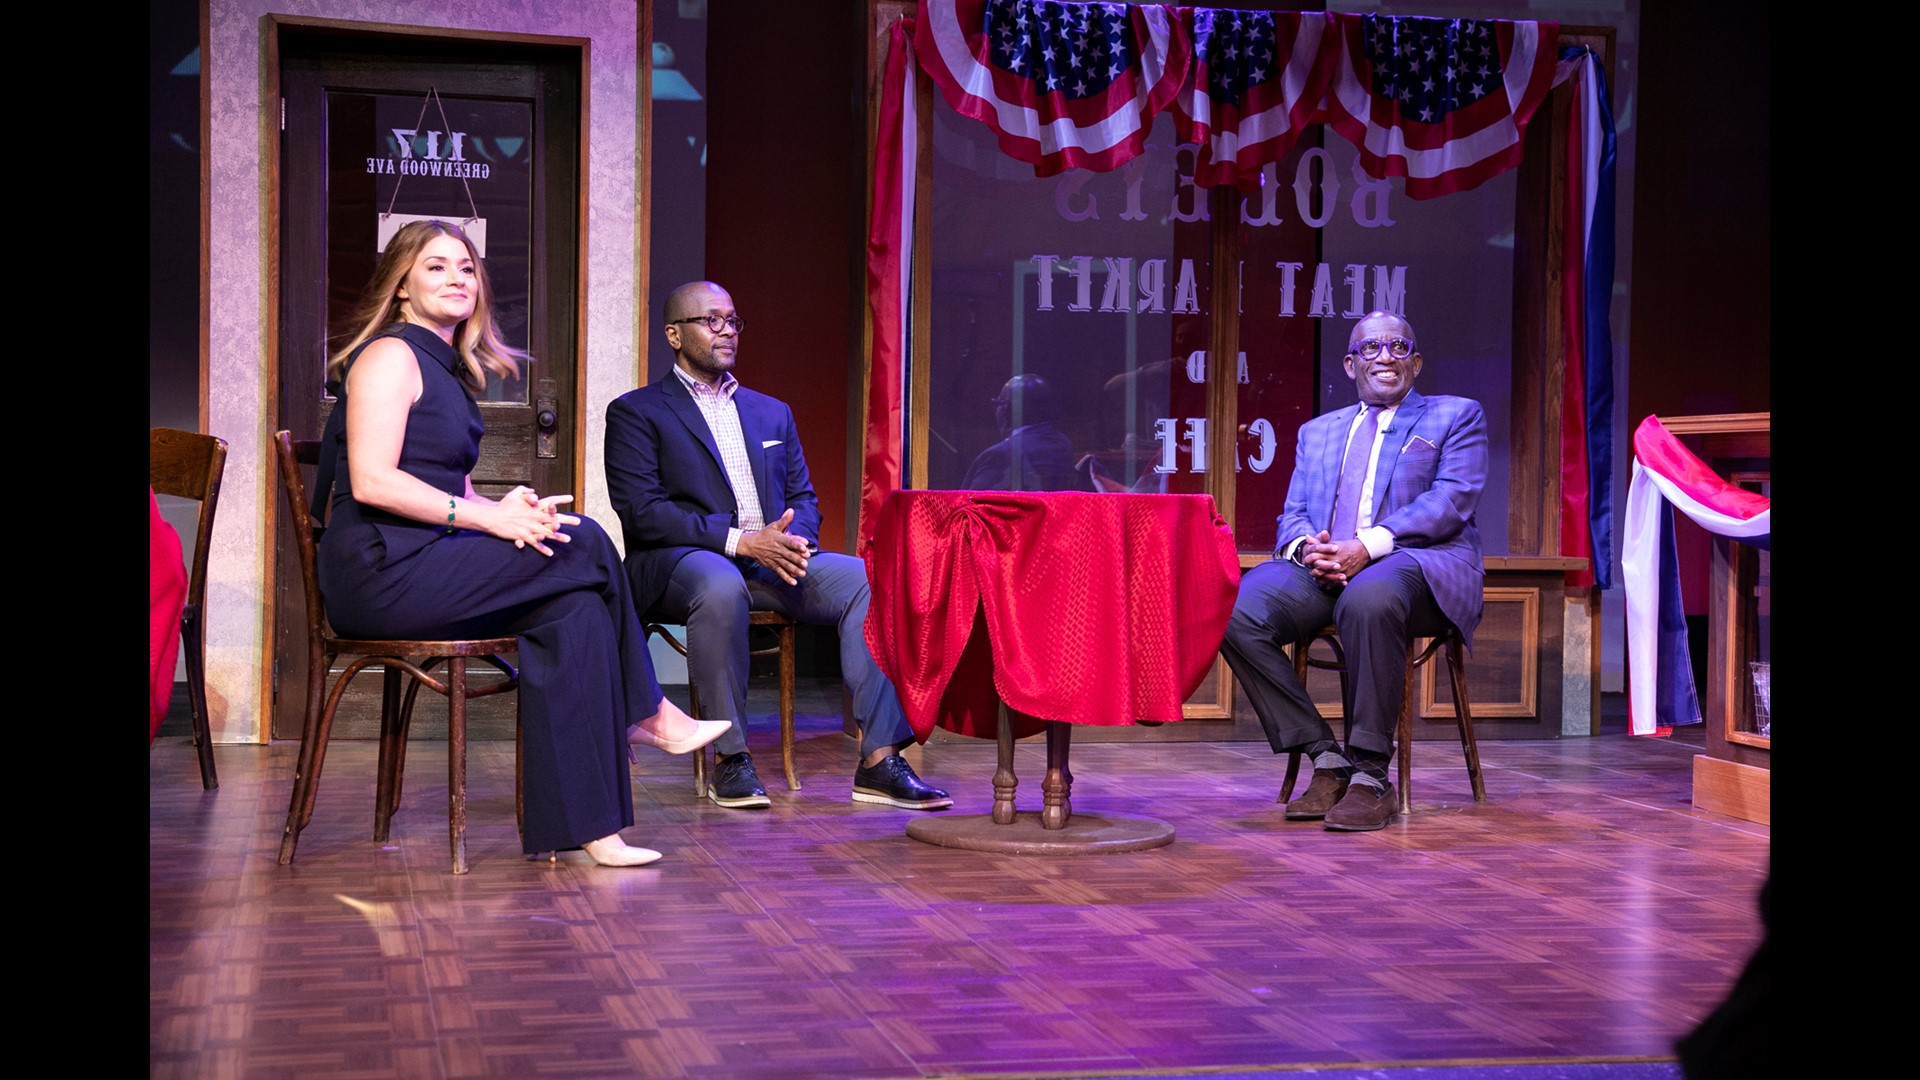 Al Roker teams up with 3News' Maureen Kyle to learn what's next for Cleveland's historic theater institutions.